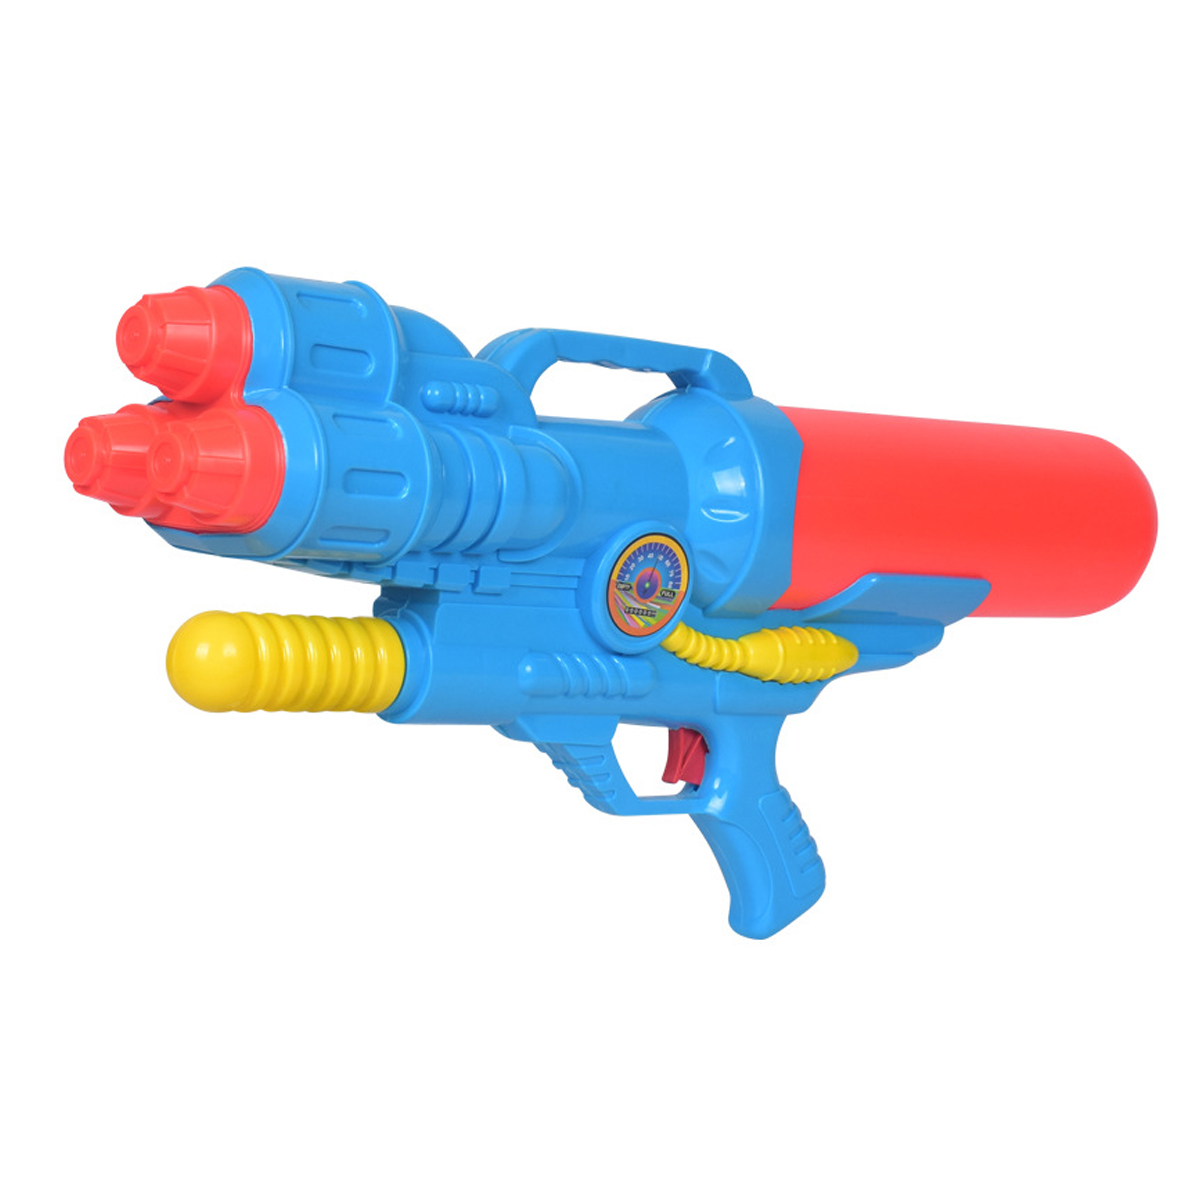 1500ml-Red-Or-Blue-Toy-Water-Sprinkler-With-A-Range-Of-7-9m-Plastic-Water-Sprinkler-For-Children-Bea-1703042-13